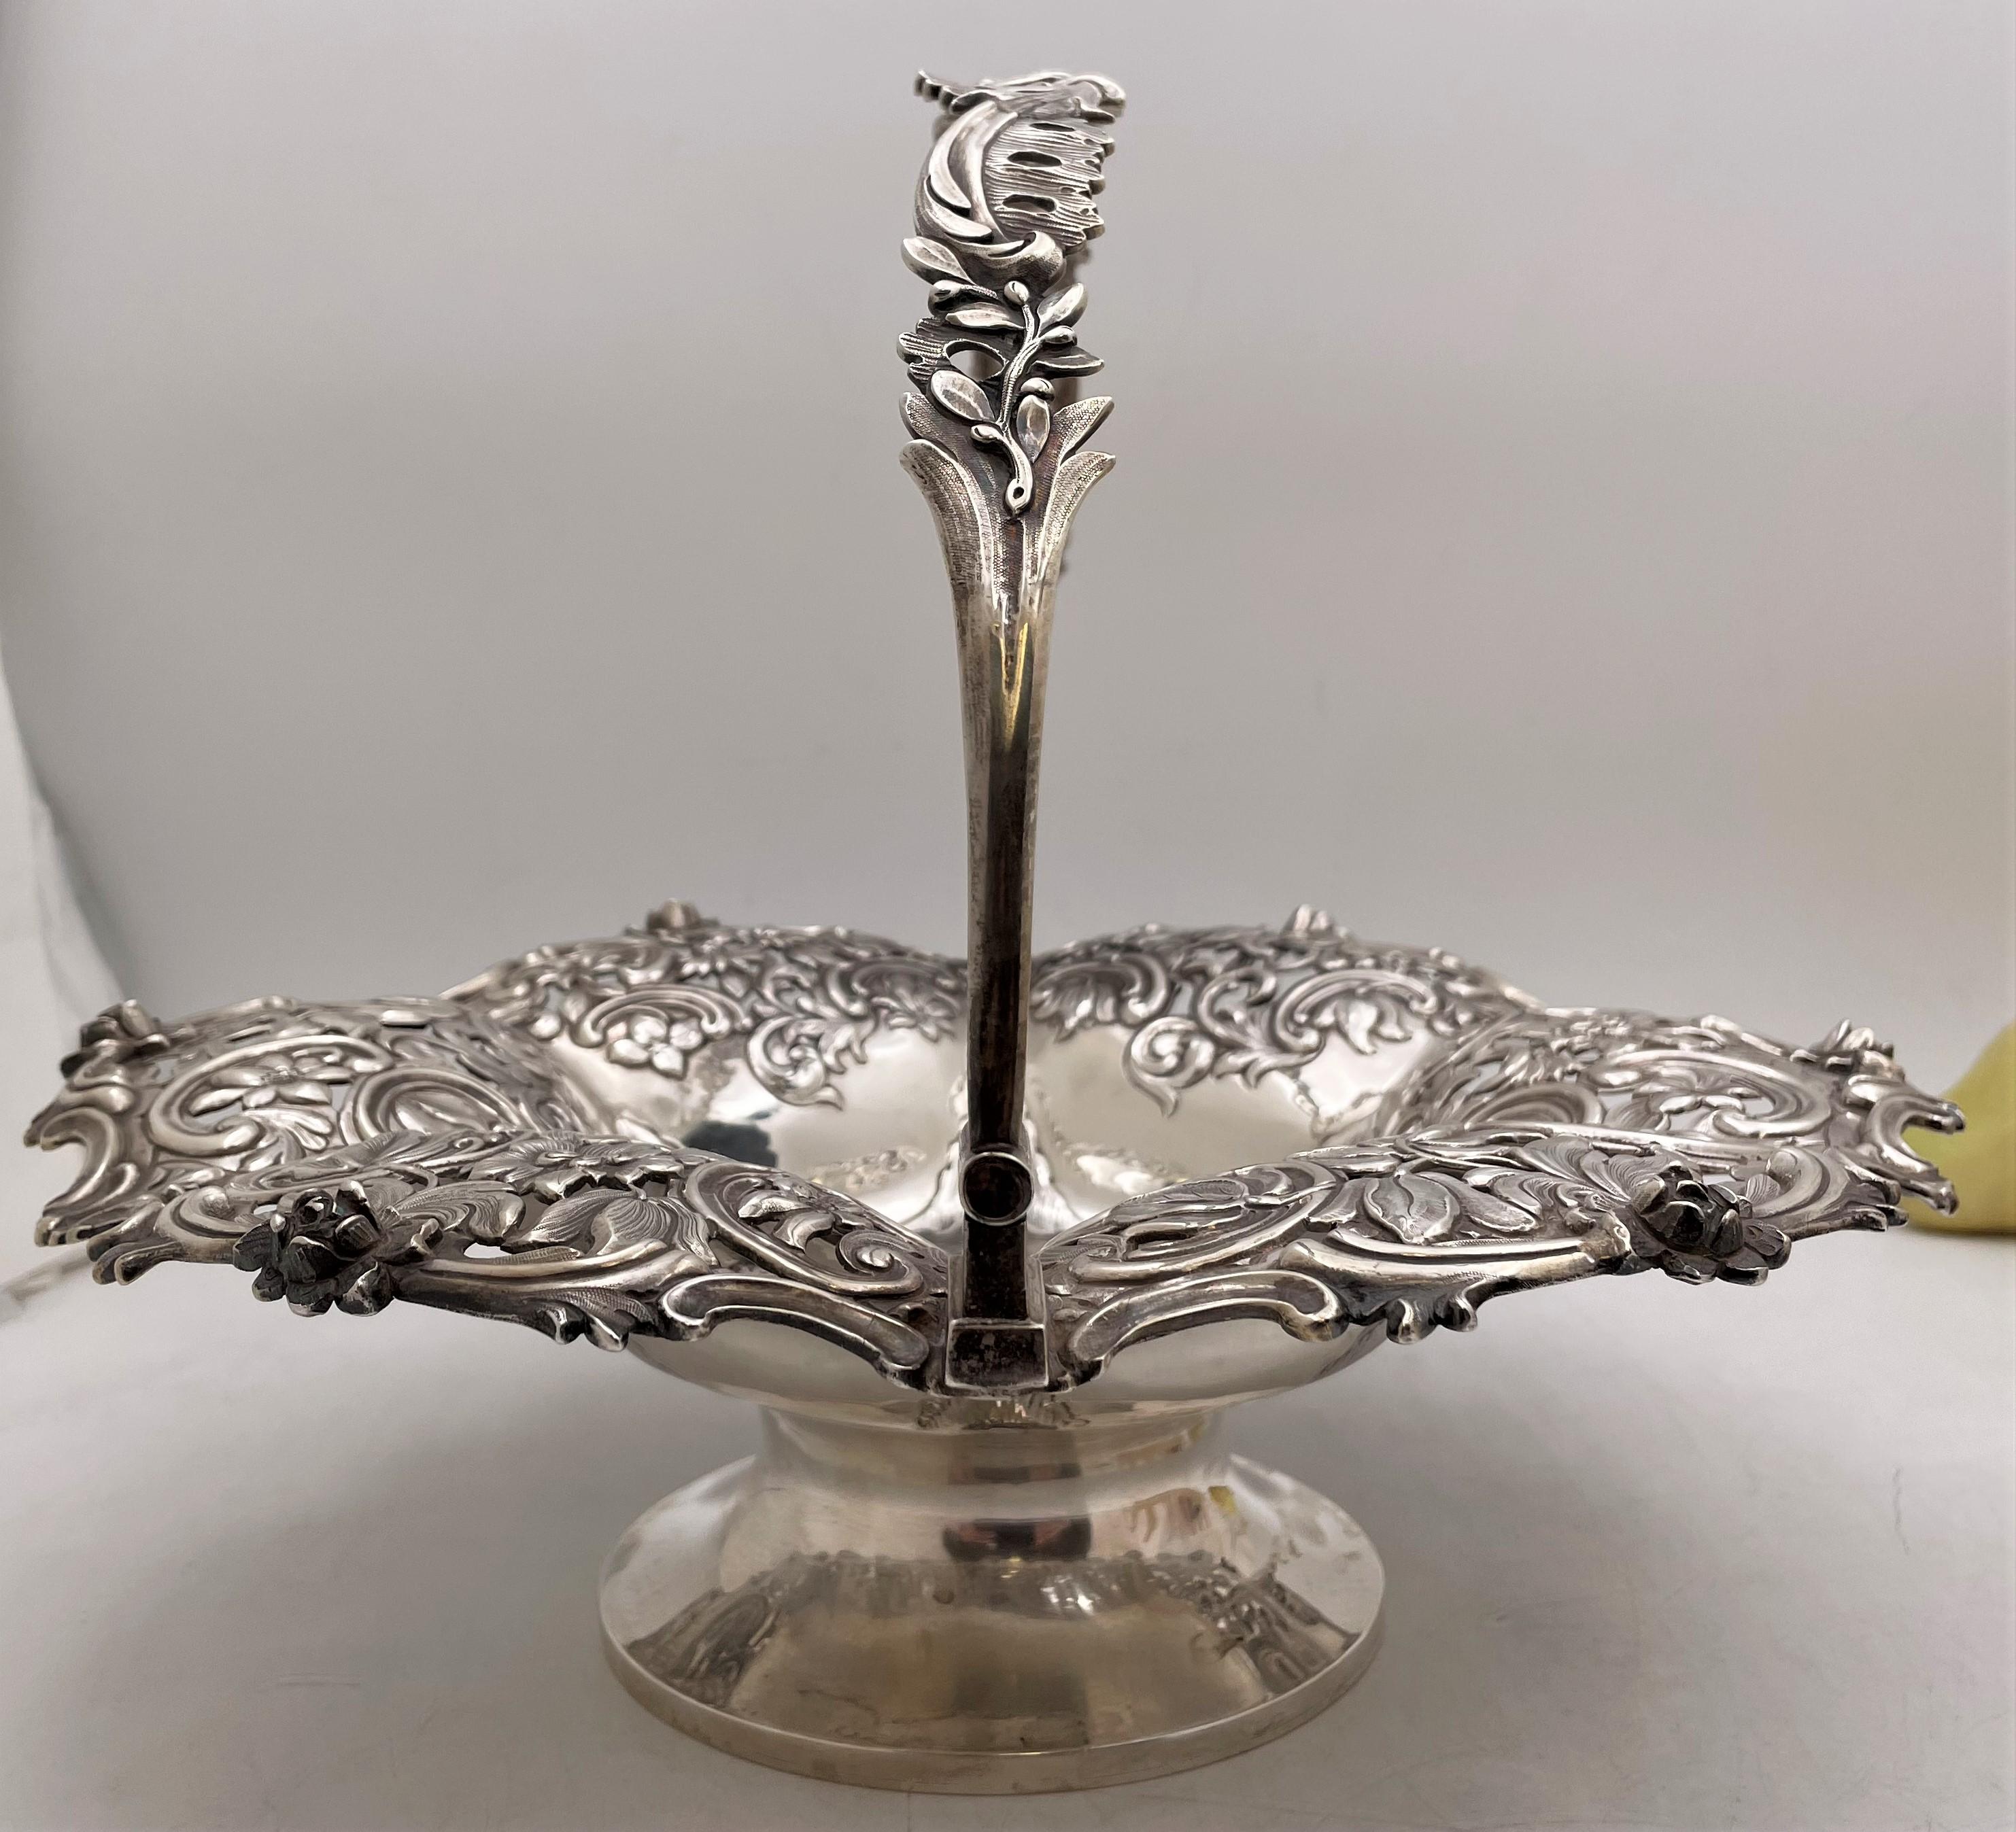 English sterling silver basket or bowl from 1841, designed an enchanting border with raised scrolls, leaves and flowers and standing on a base. It measures 10 3/4'' in height with the handle up (4 1/4'' without) by 12 1/2'' in diameter, weighs 31.5